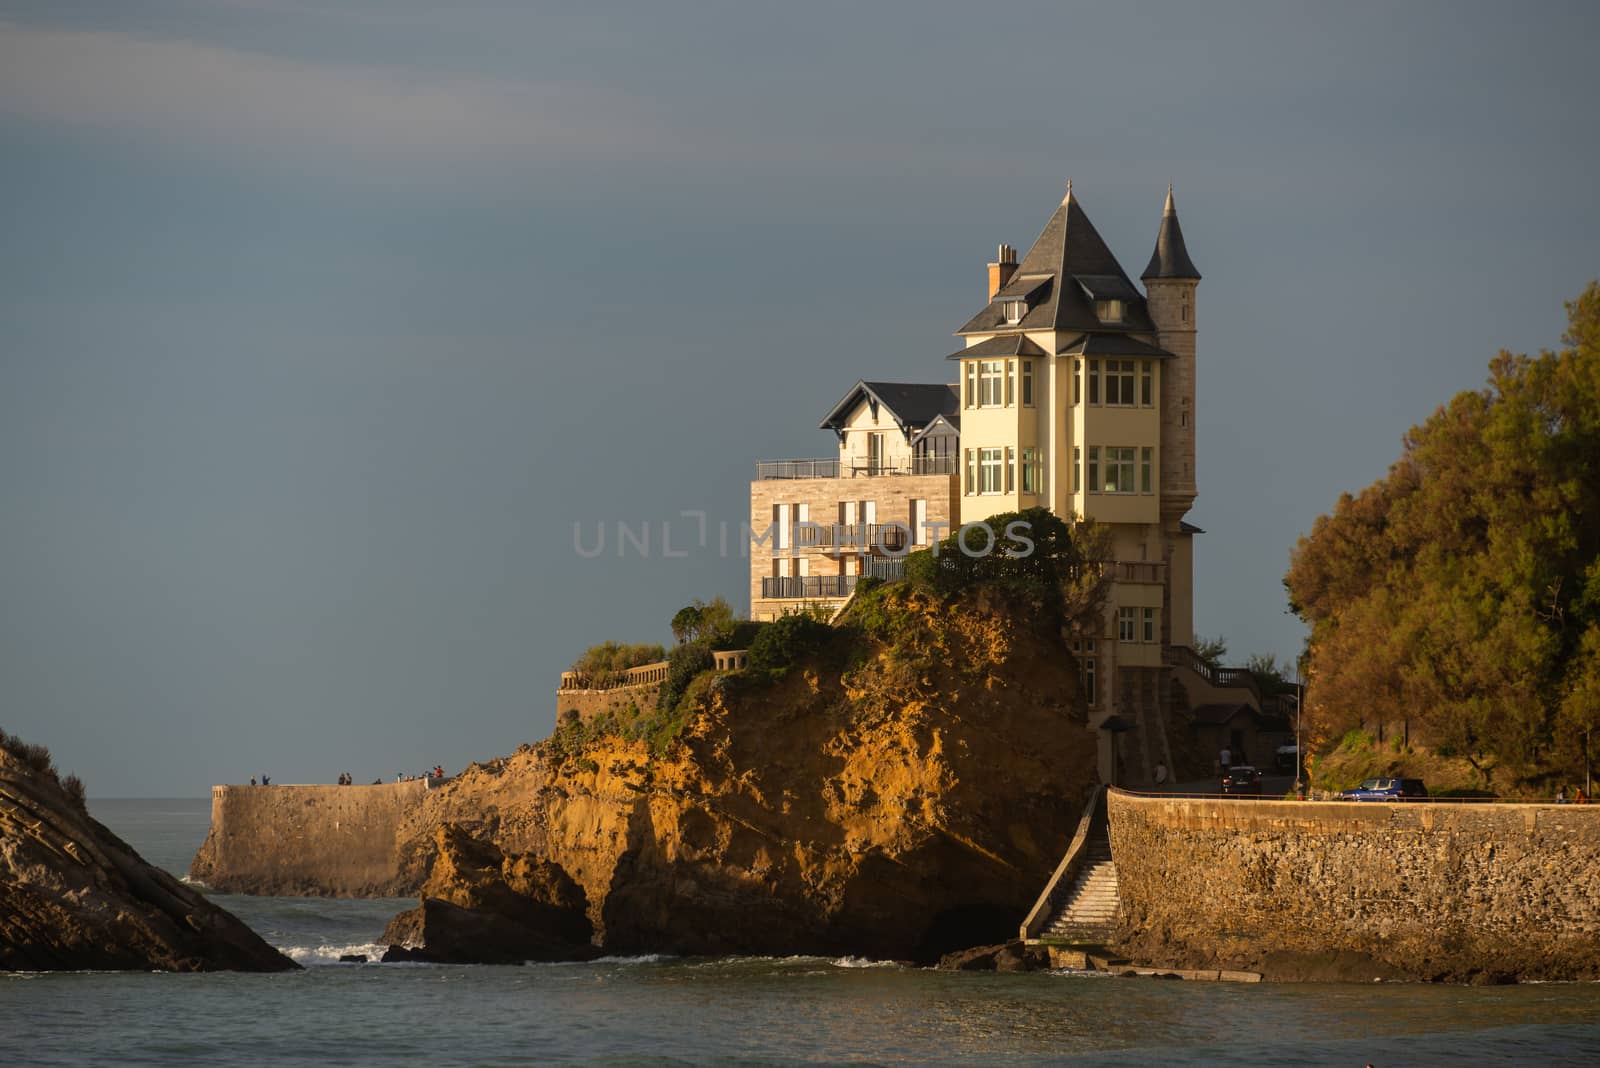 Villa Belza in Biarritz, France. Late afternoon light and cloudy sky.